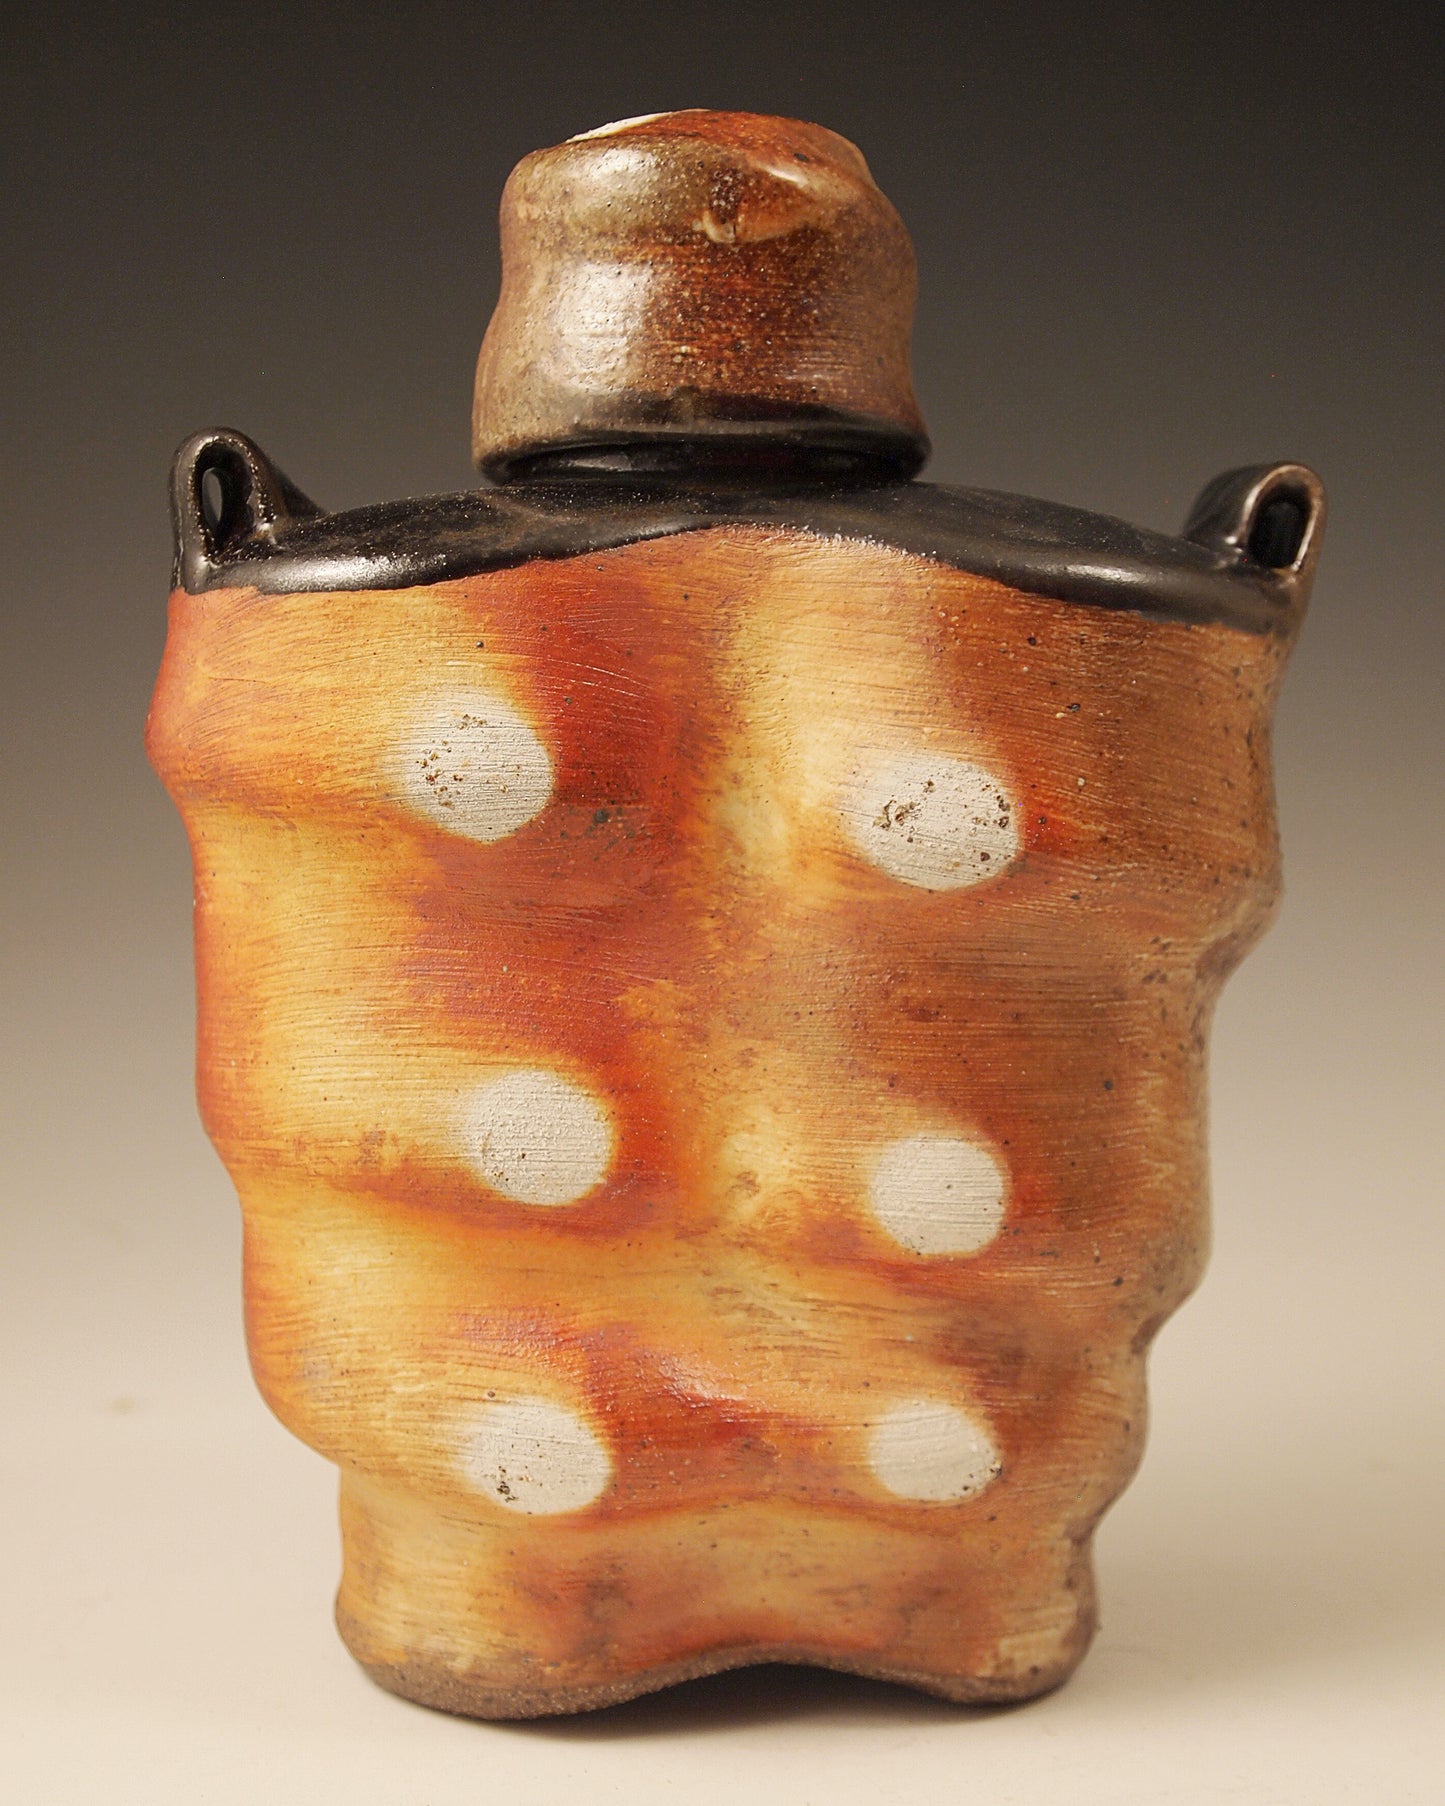 Wood-fired Stoneware Whiskey Flask with black liner glaze and black shoulders. Handmade. One-of-a-kind ceramic flask. 7" tall. 5.5" wide. 3" deep. 